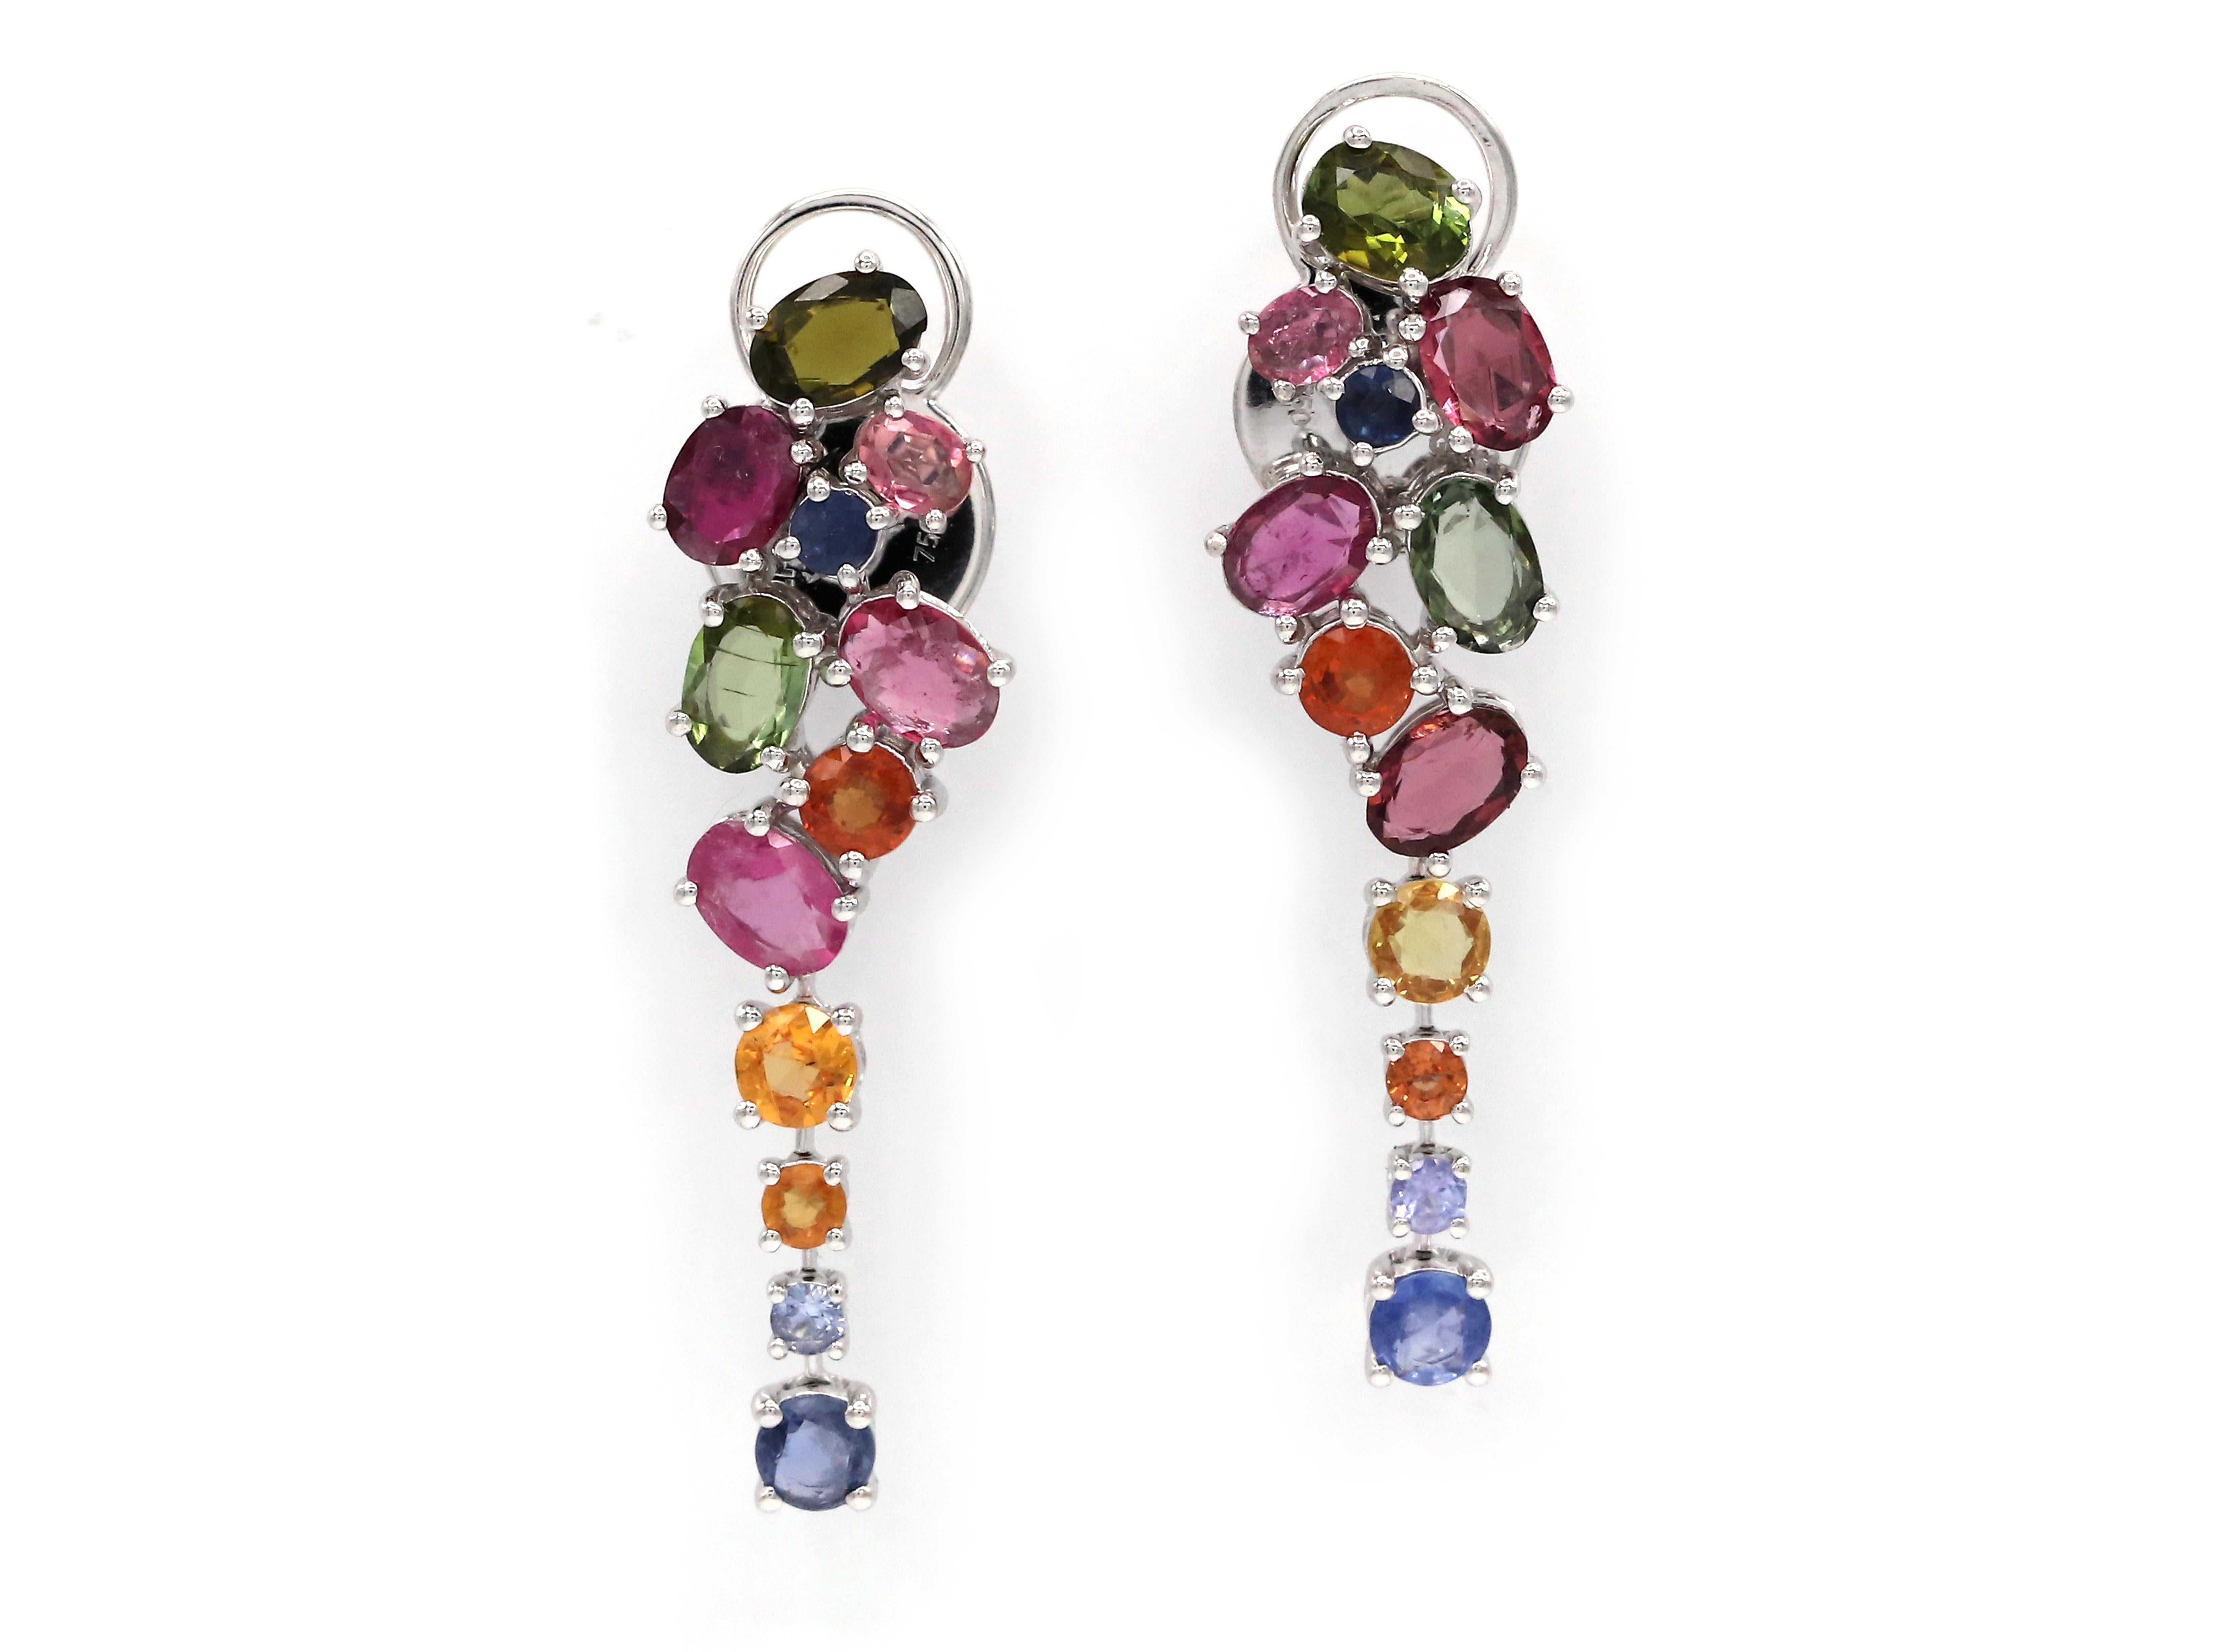 18 K White Gold

23 Gems (total weight: 5.37 Carat): Yellow Sapphire, Rubis, Emerald, Topaz and Amethyst

ALPENGEM uses gems of exceptional quality to create exquisite high end jewelry. These earrings are inspired by Art Deco floral motives. The